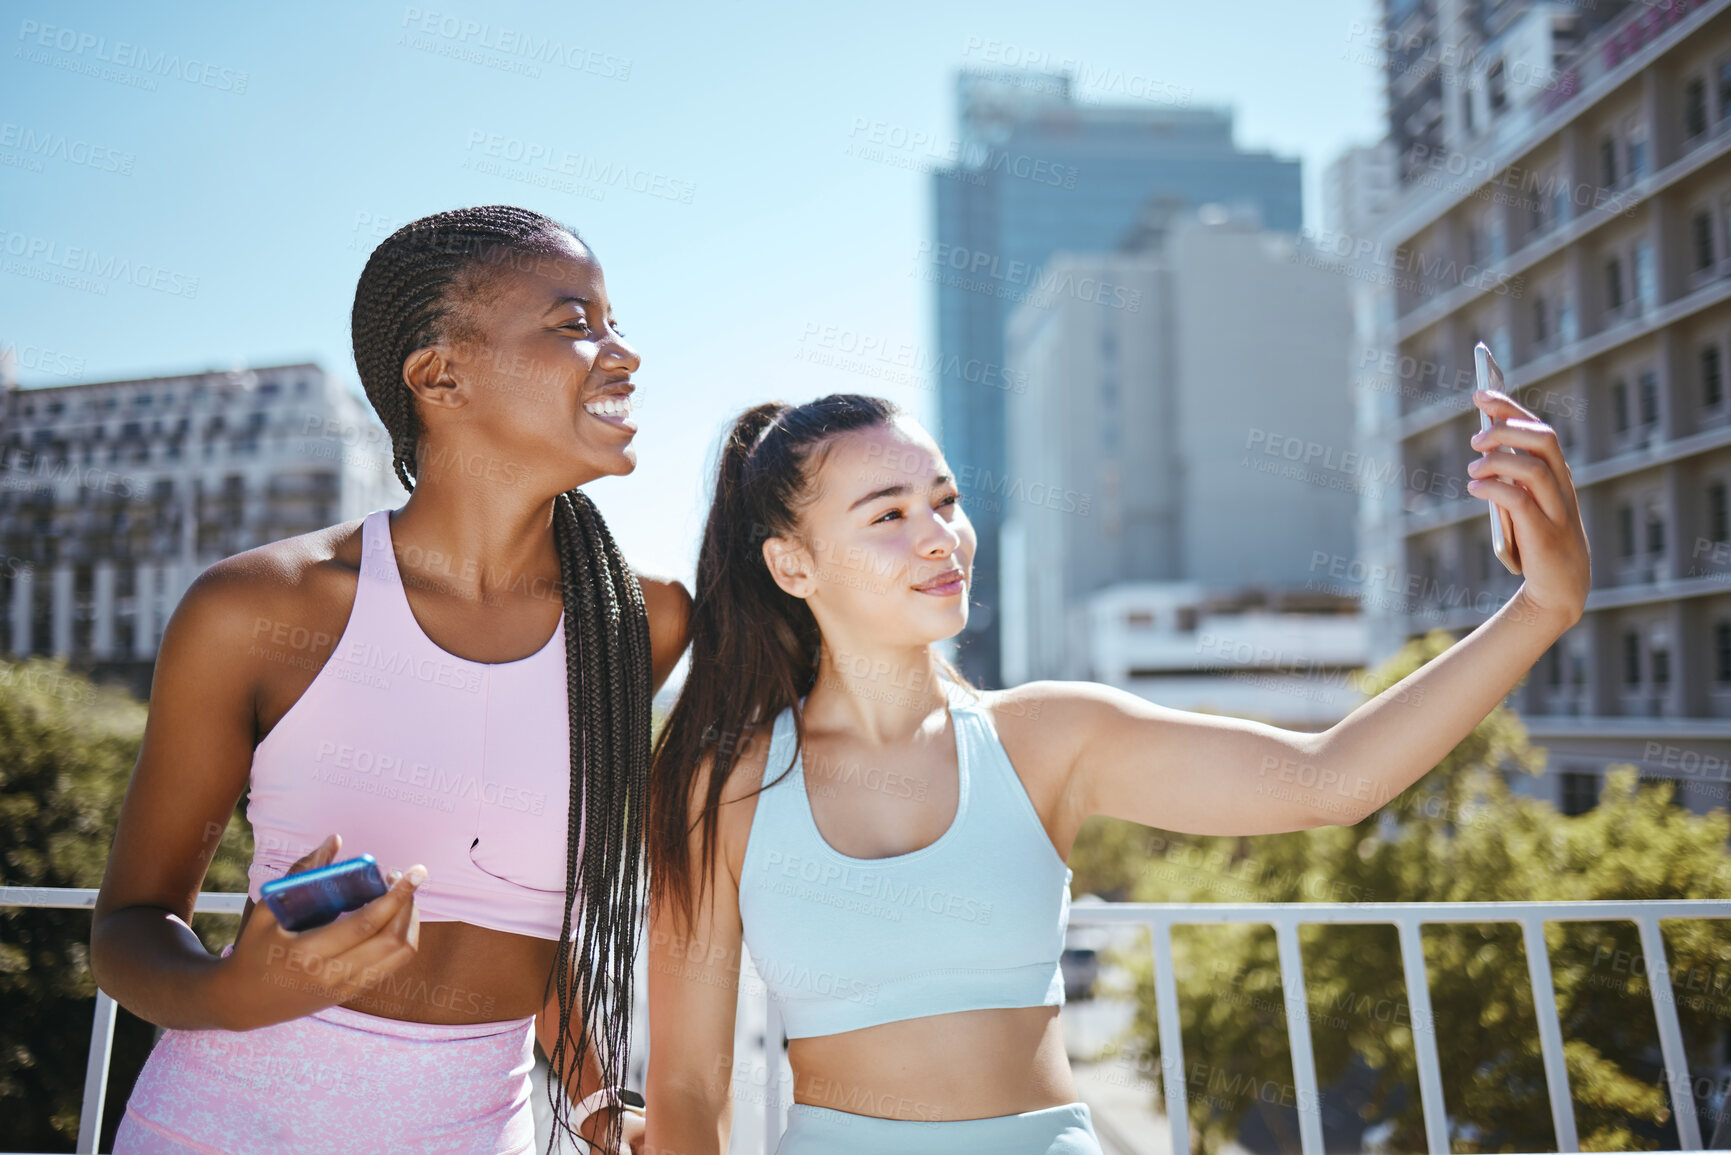 Buy stock photo Fitness selfie, urban city and women friends or influencer for outdoor workout, motivation and training. Personal trainer or runner couple people taking photo together for social media wellness post